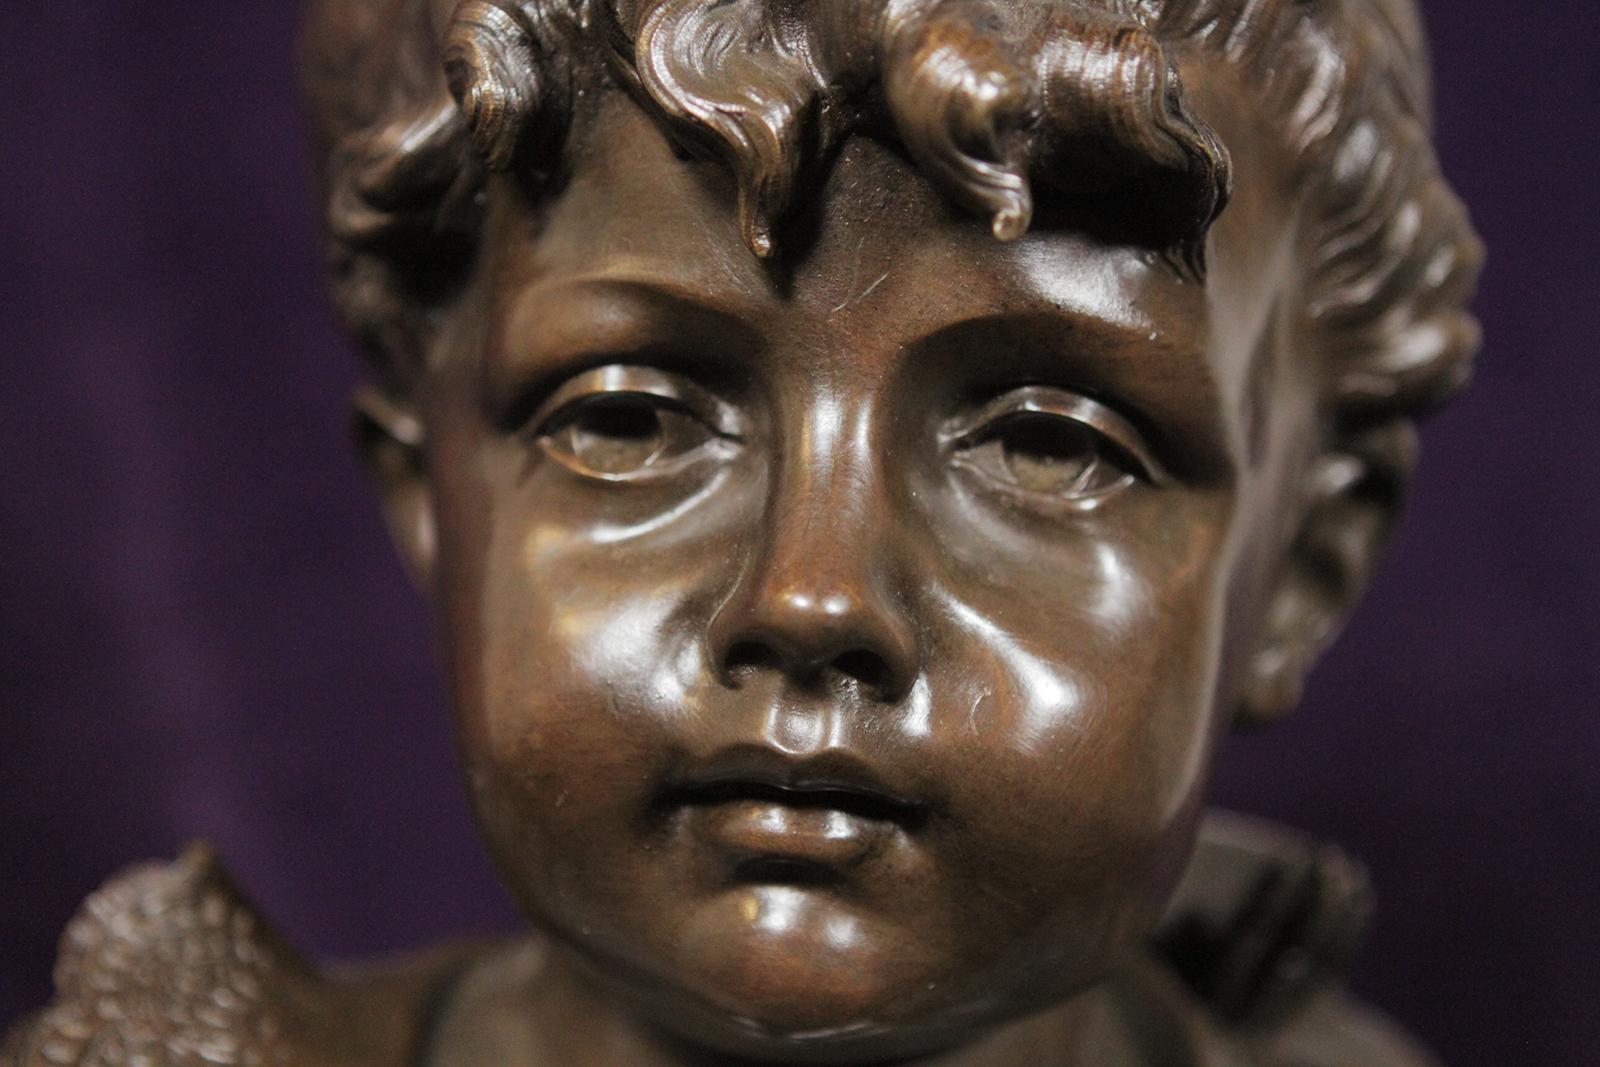 Bust of young girl beautifully cast with original patination.
Dimensions: 11” W x 7” D x 20” H.